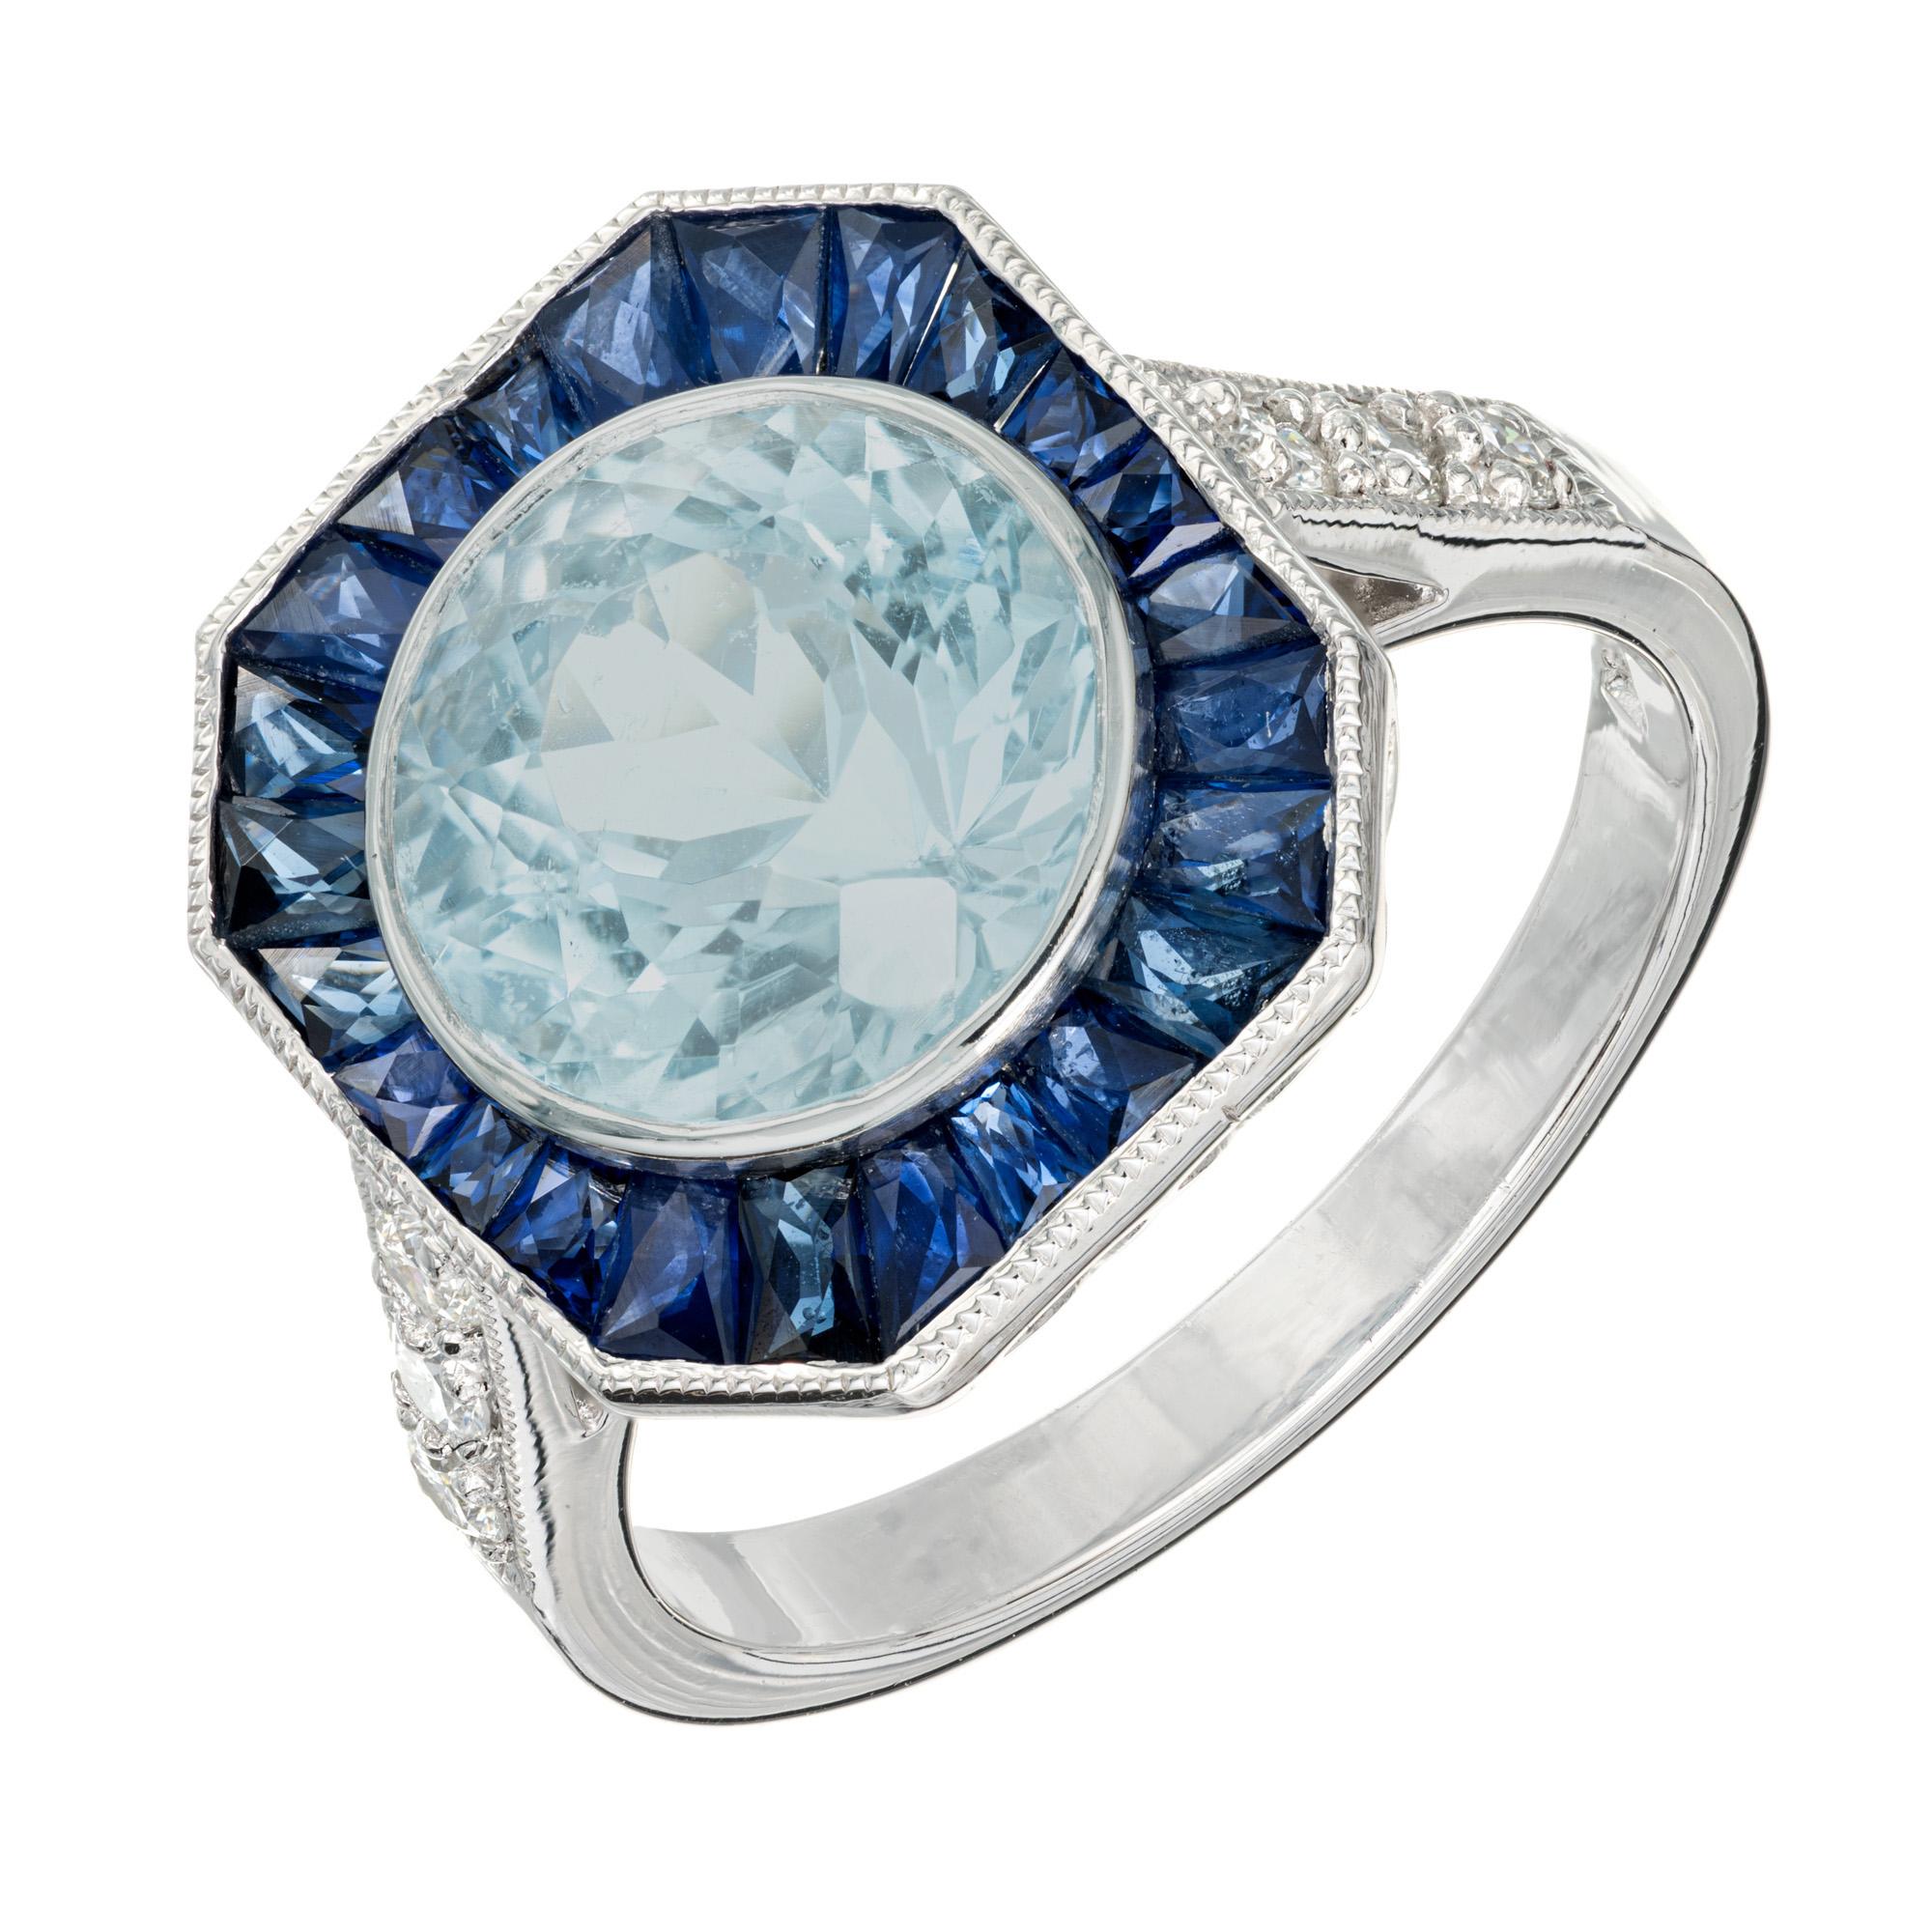 Top gem quality round European cut natural Santa Maria 2.96ct aquamarine from the early 1900's, with a halo of French cut tapered baguette  sapphires, set in a platinum setting with 3 round diamonds on each shoulder. Designed and crafted in the